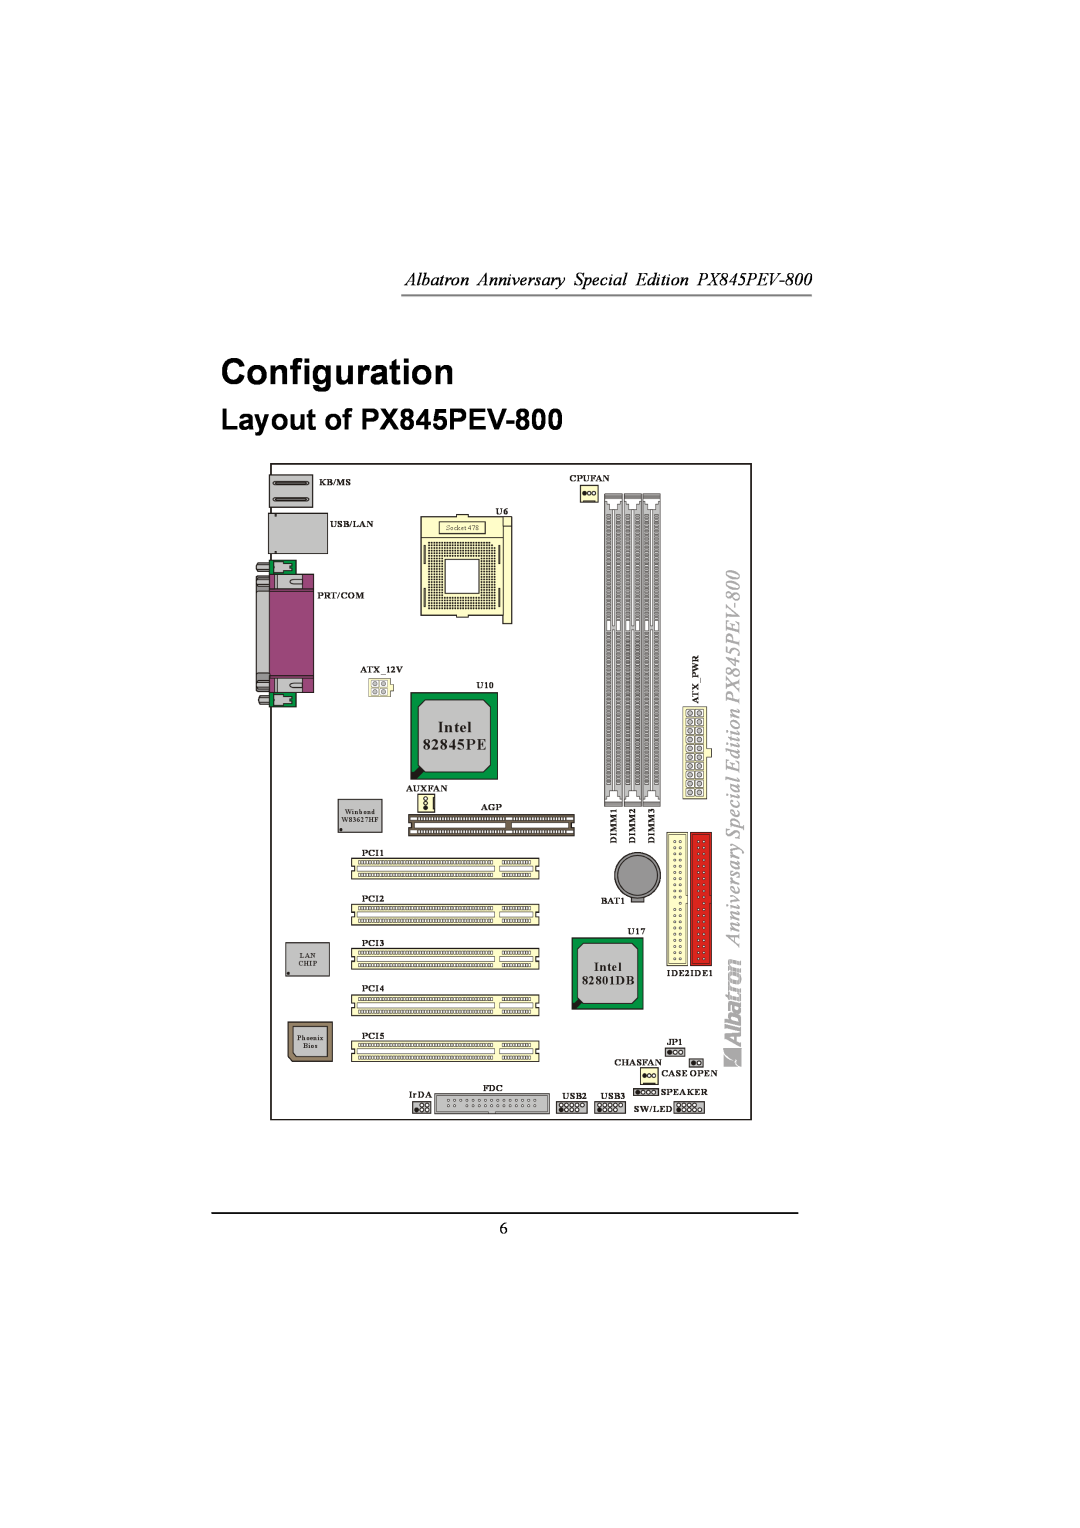 Albatron Technology Configuration, Layout of PX845PEV-800, Albatron Anniversary Special Edition PX845PEV-800, Intel 